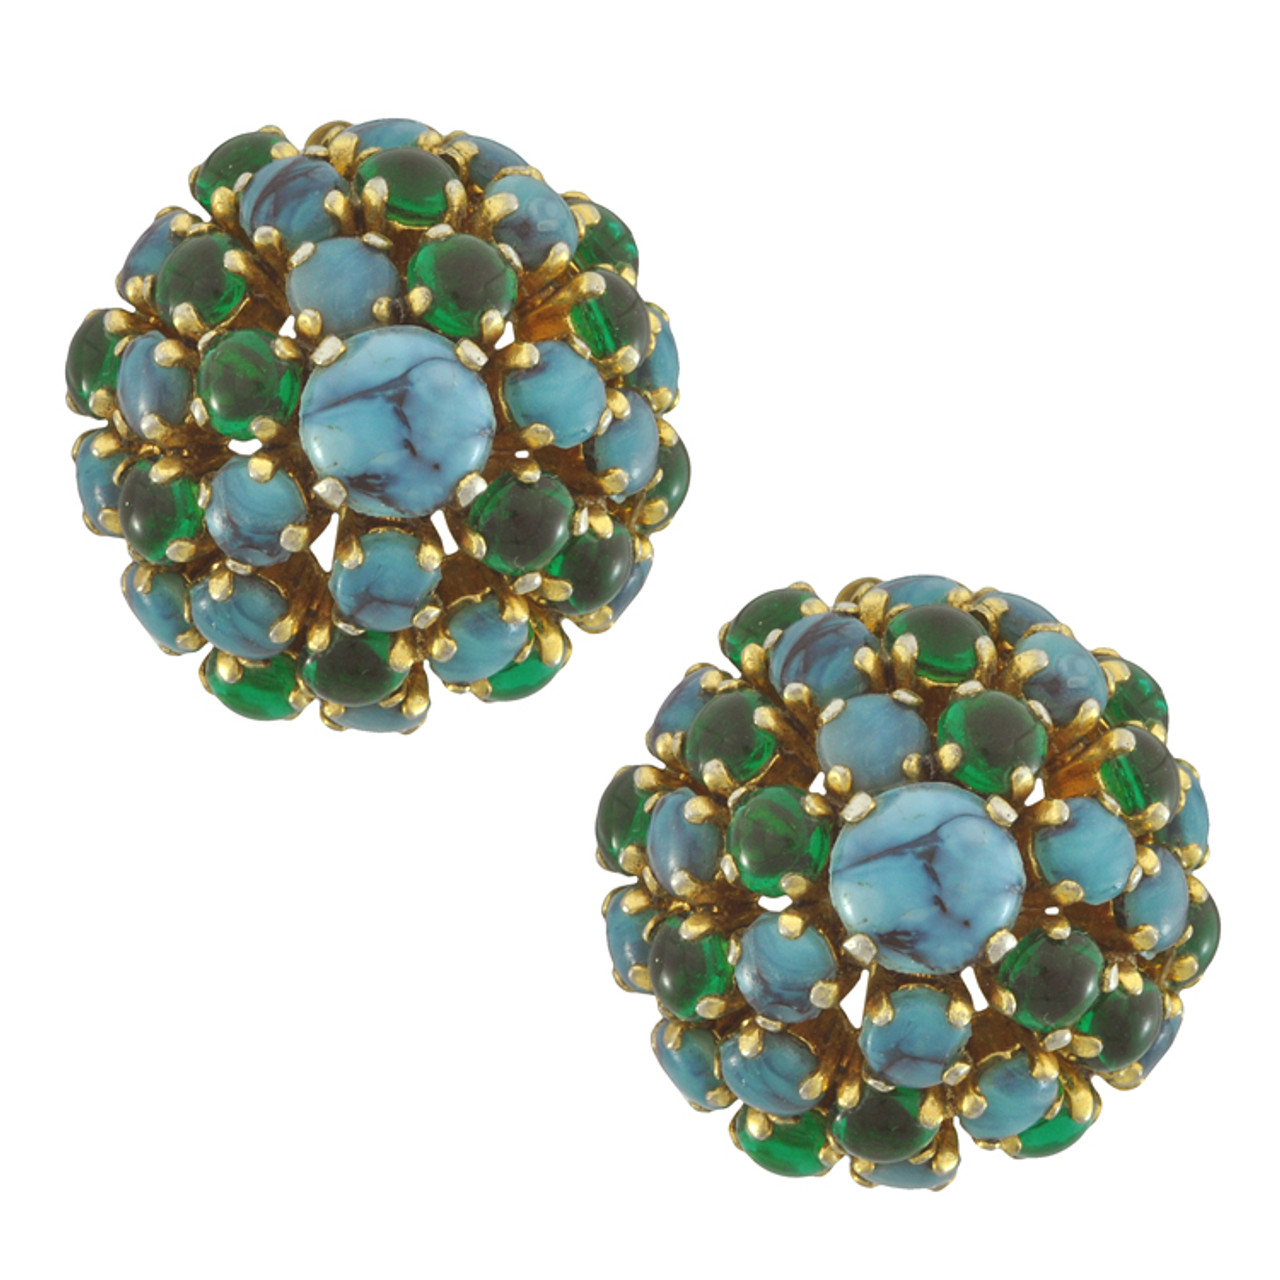 Vintage Christian Dior Turquoise Cabochon Earrings